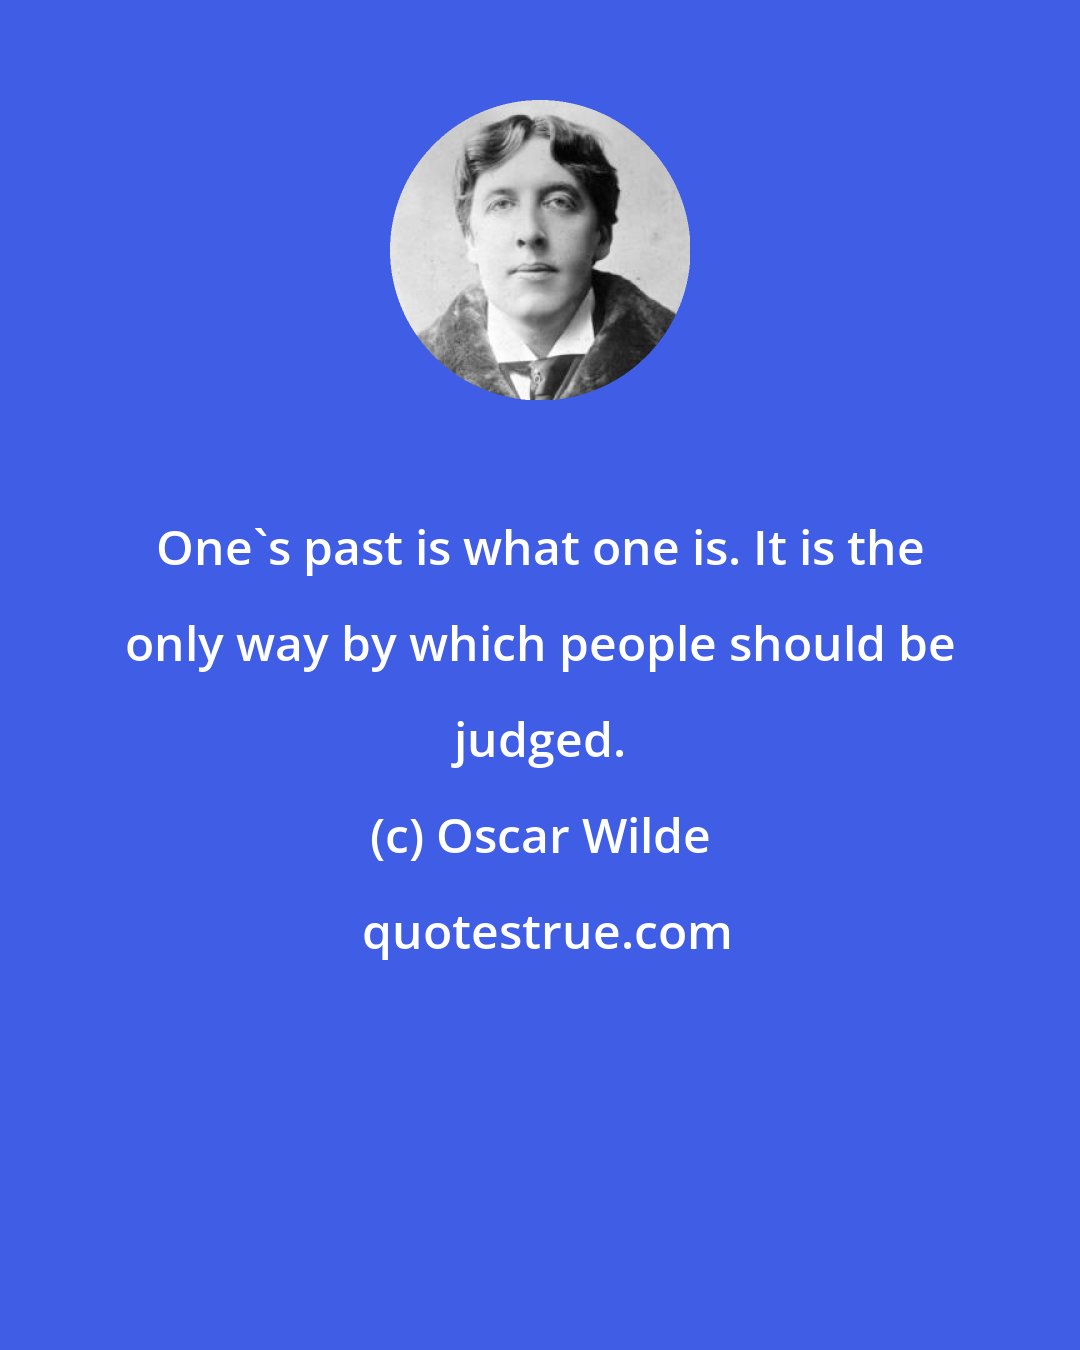 Oscar Wilde: One's past is what one is. It is the only way by which people should be judged.